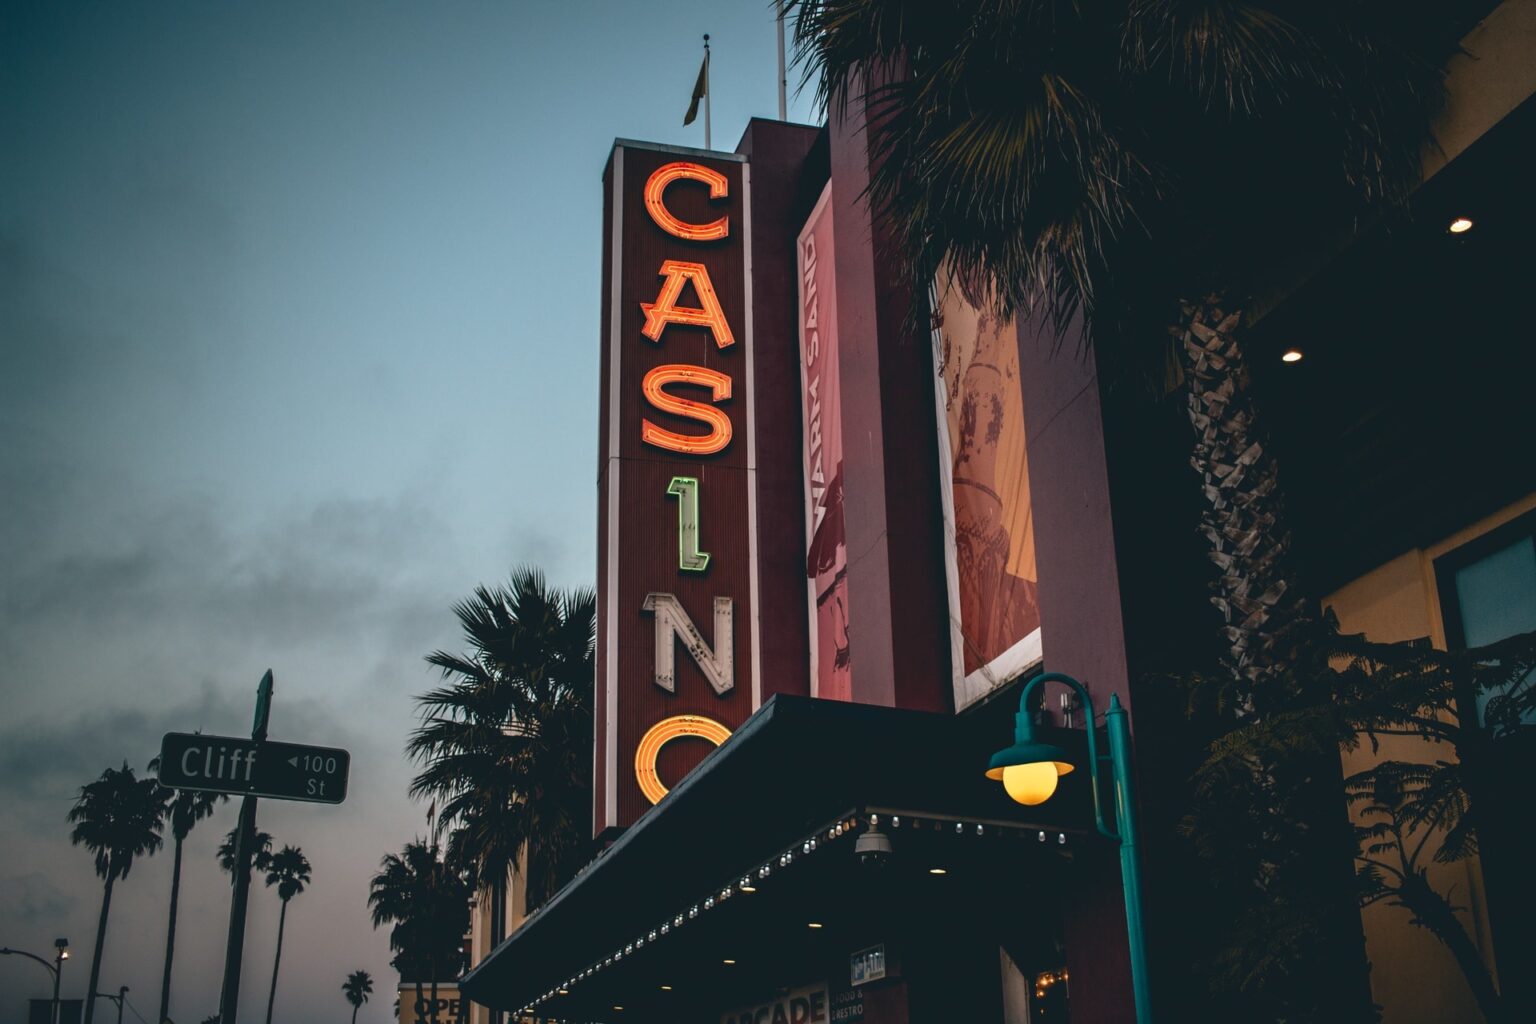 Casino movies have an appeal that many other movie genres do not. Here's why you need to binge more movies about the casino.